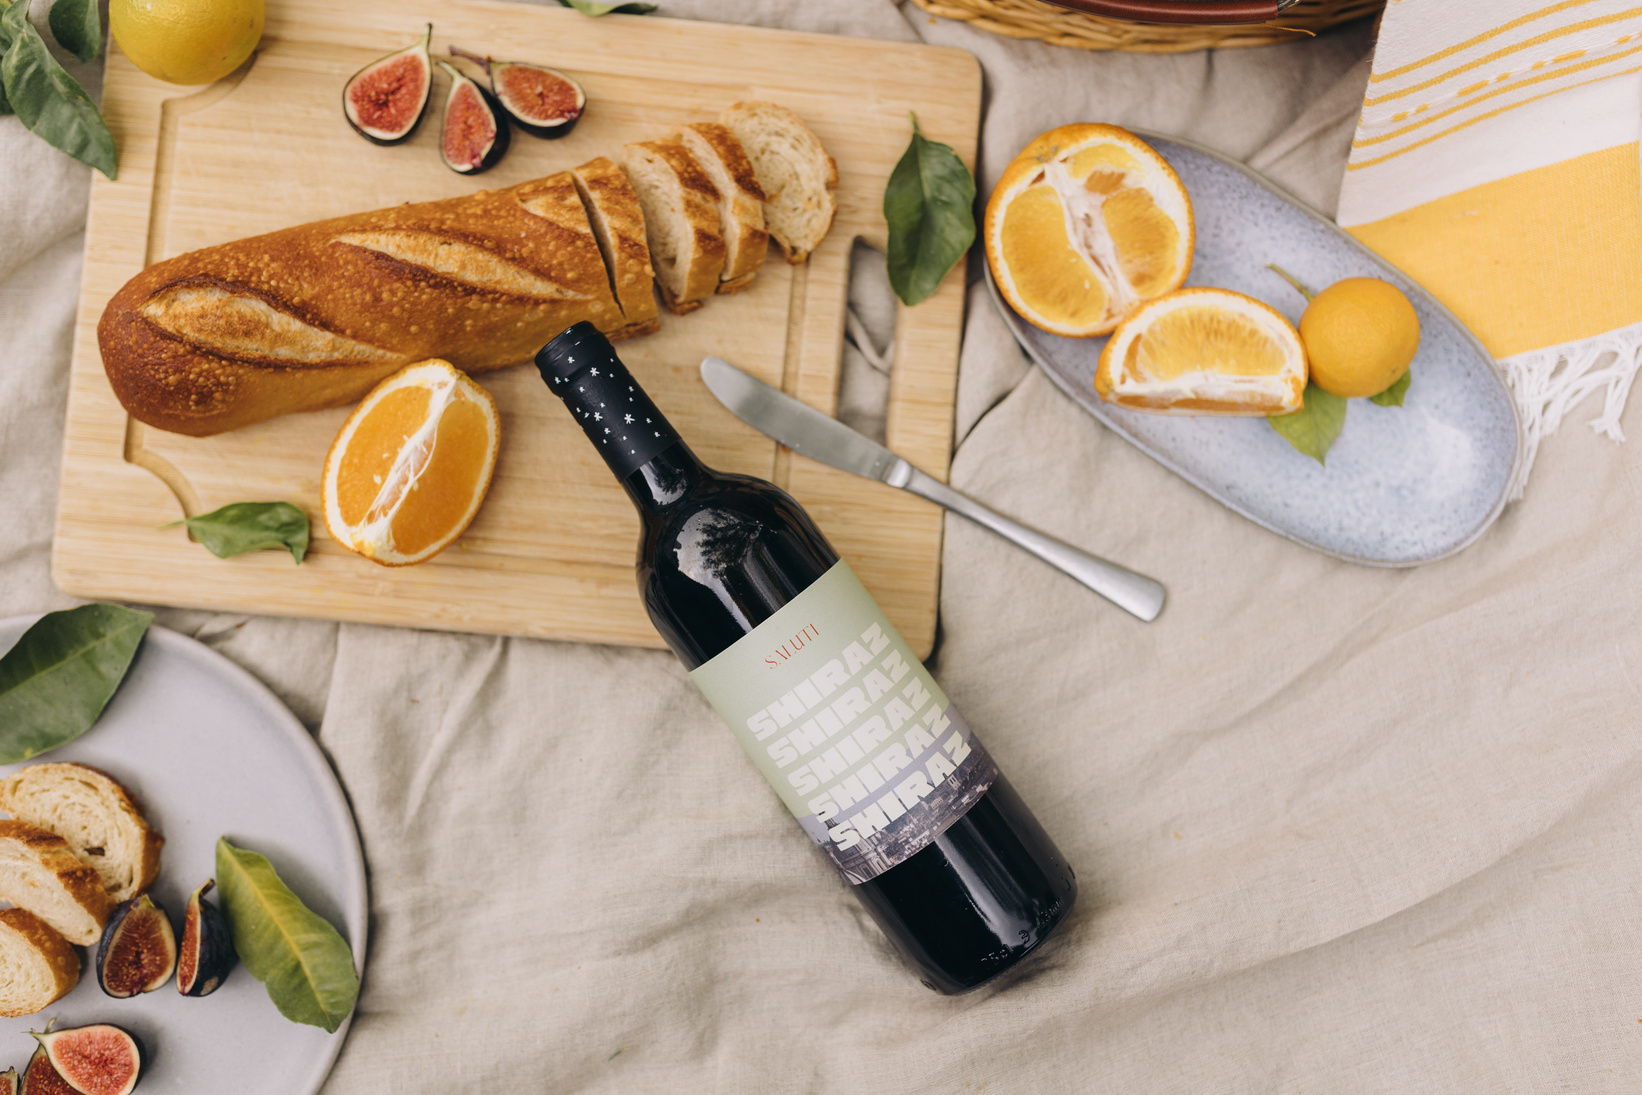 a bottle of wine, bread and fruit on a picnic blanket